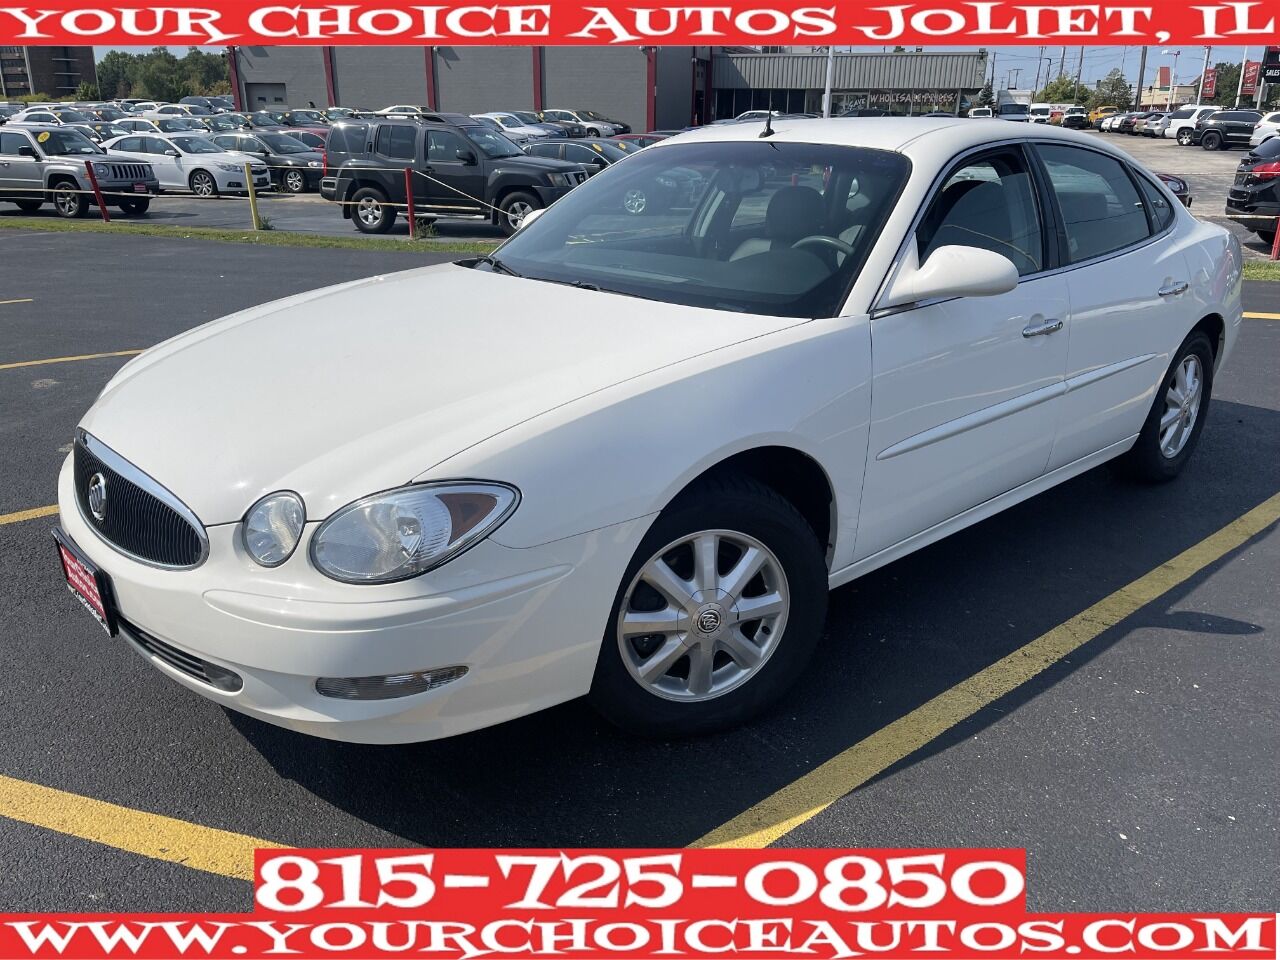 2005 Buick LaCrosse For Sale In Country Club Hills, IL - Carsforsale.com®